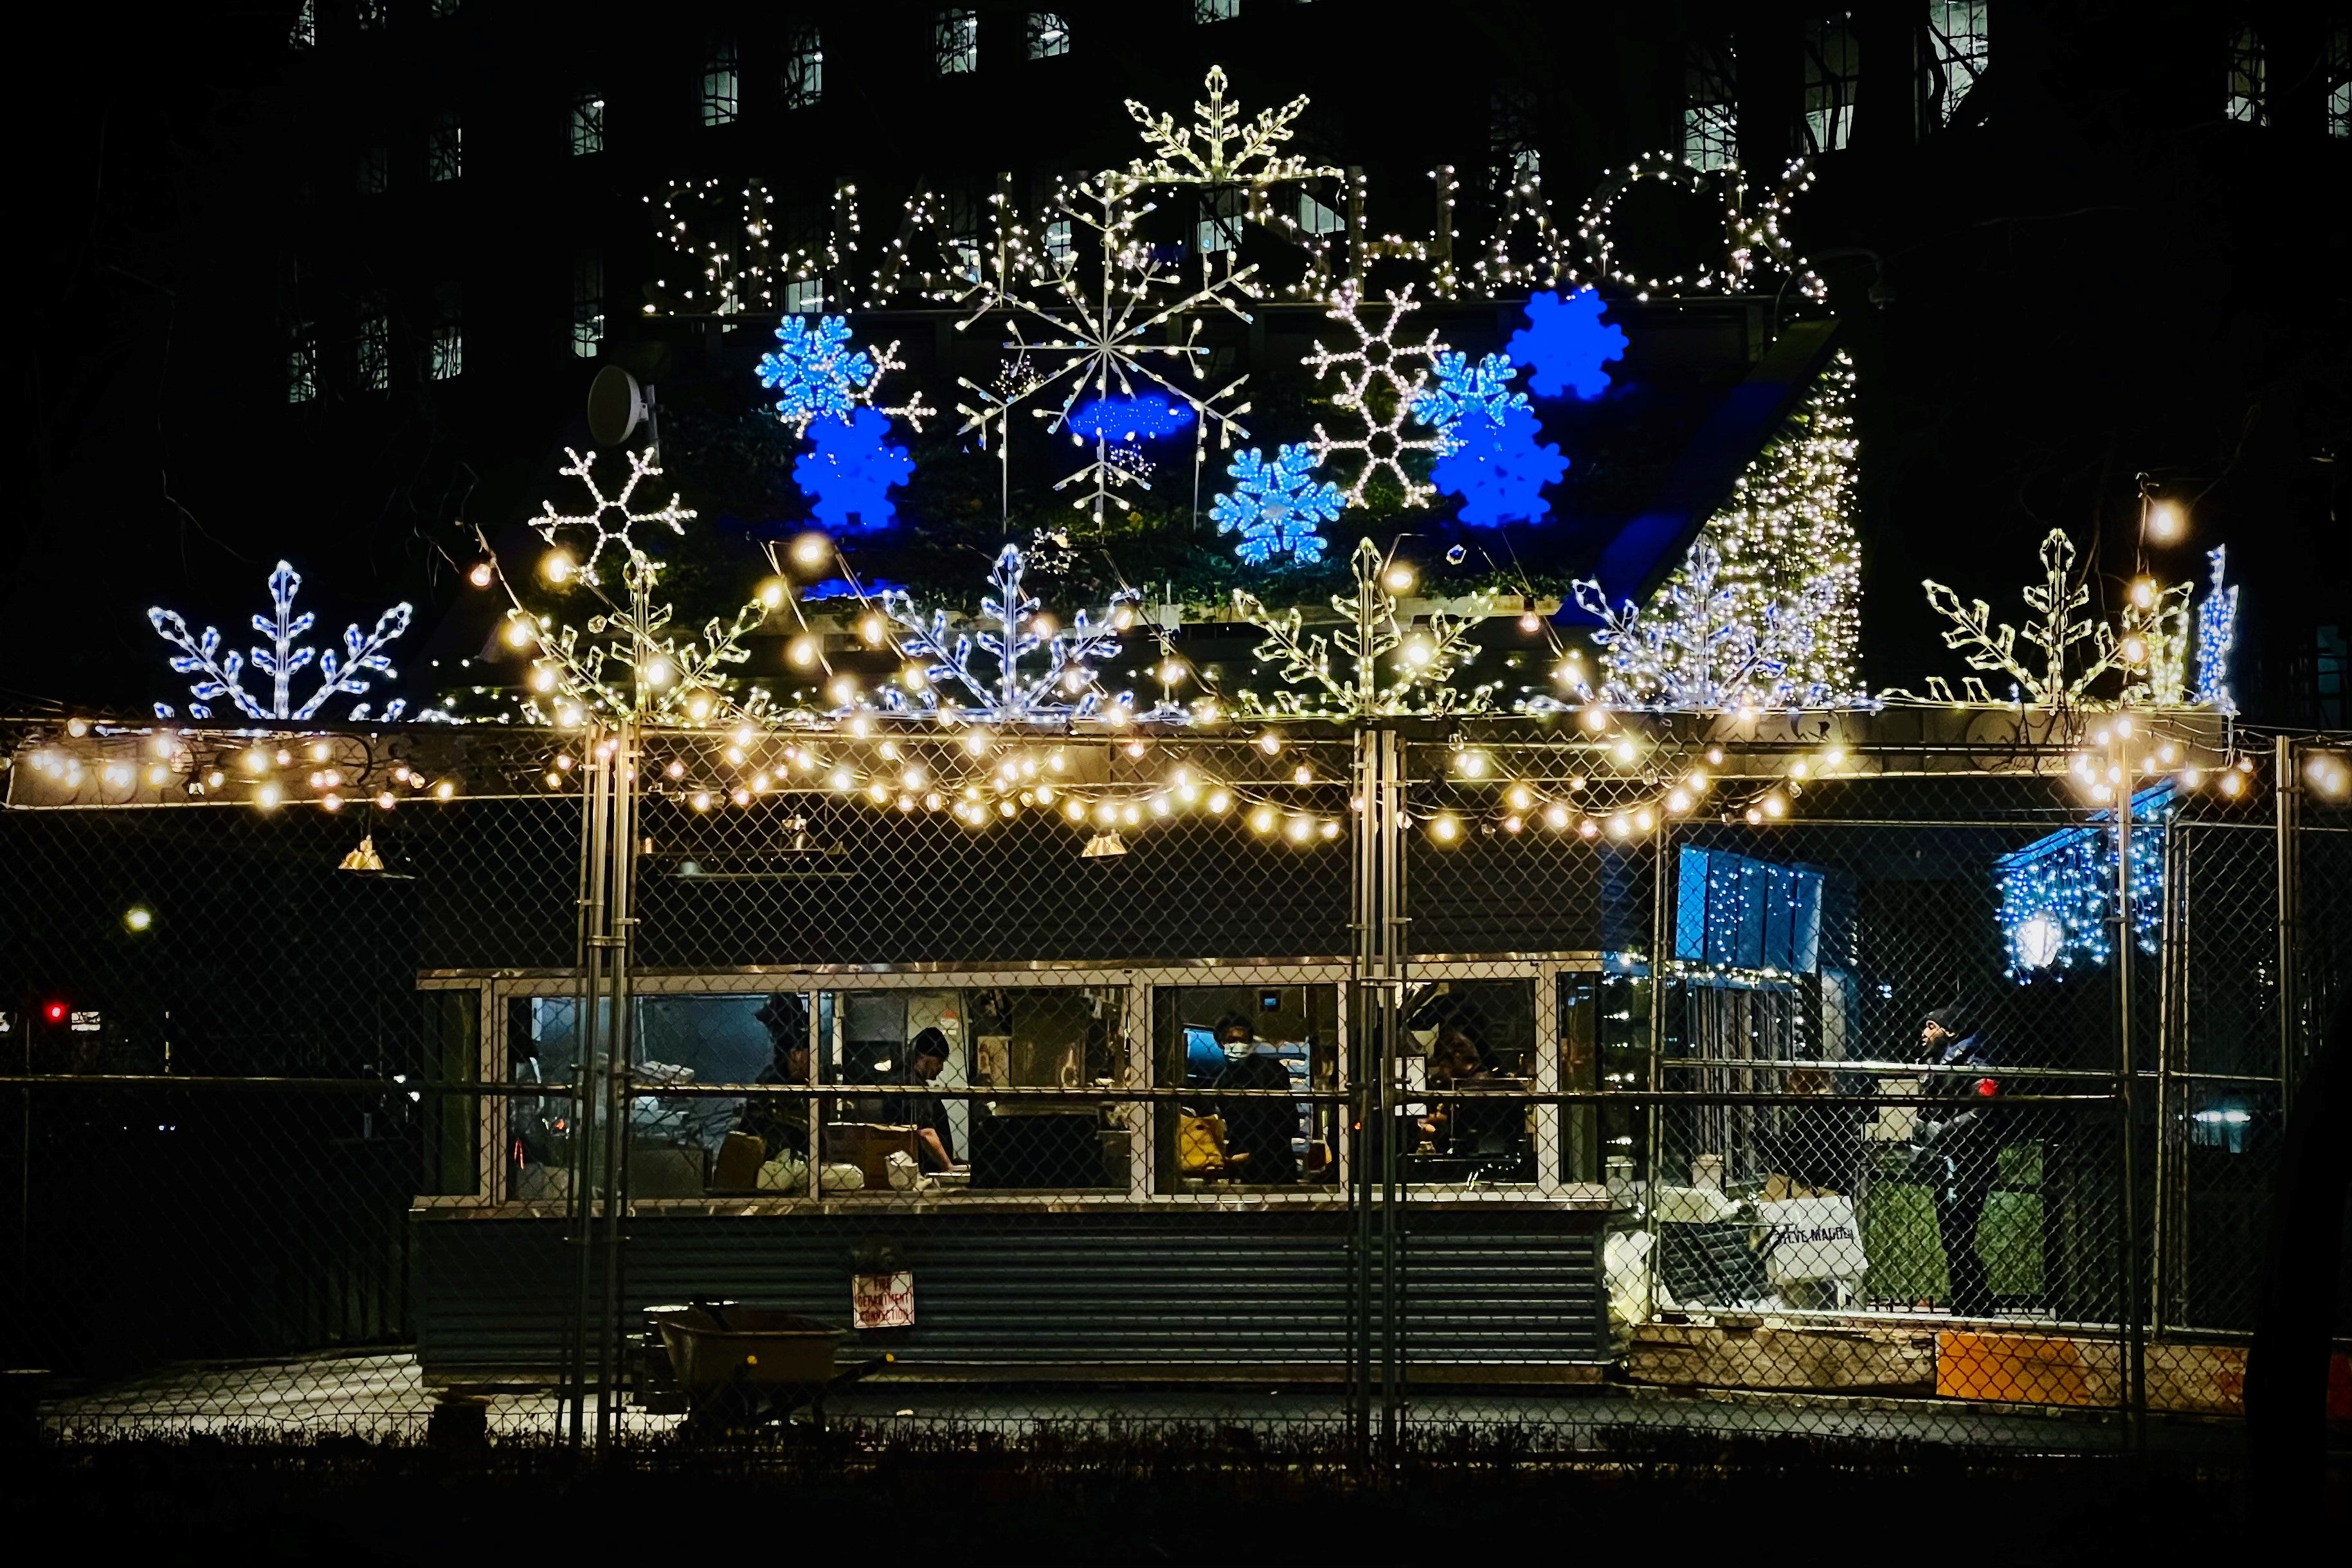 Shake Shack in Madison Square Park decorated for Christmas with Oversized Snowflakes on the roof - NYC